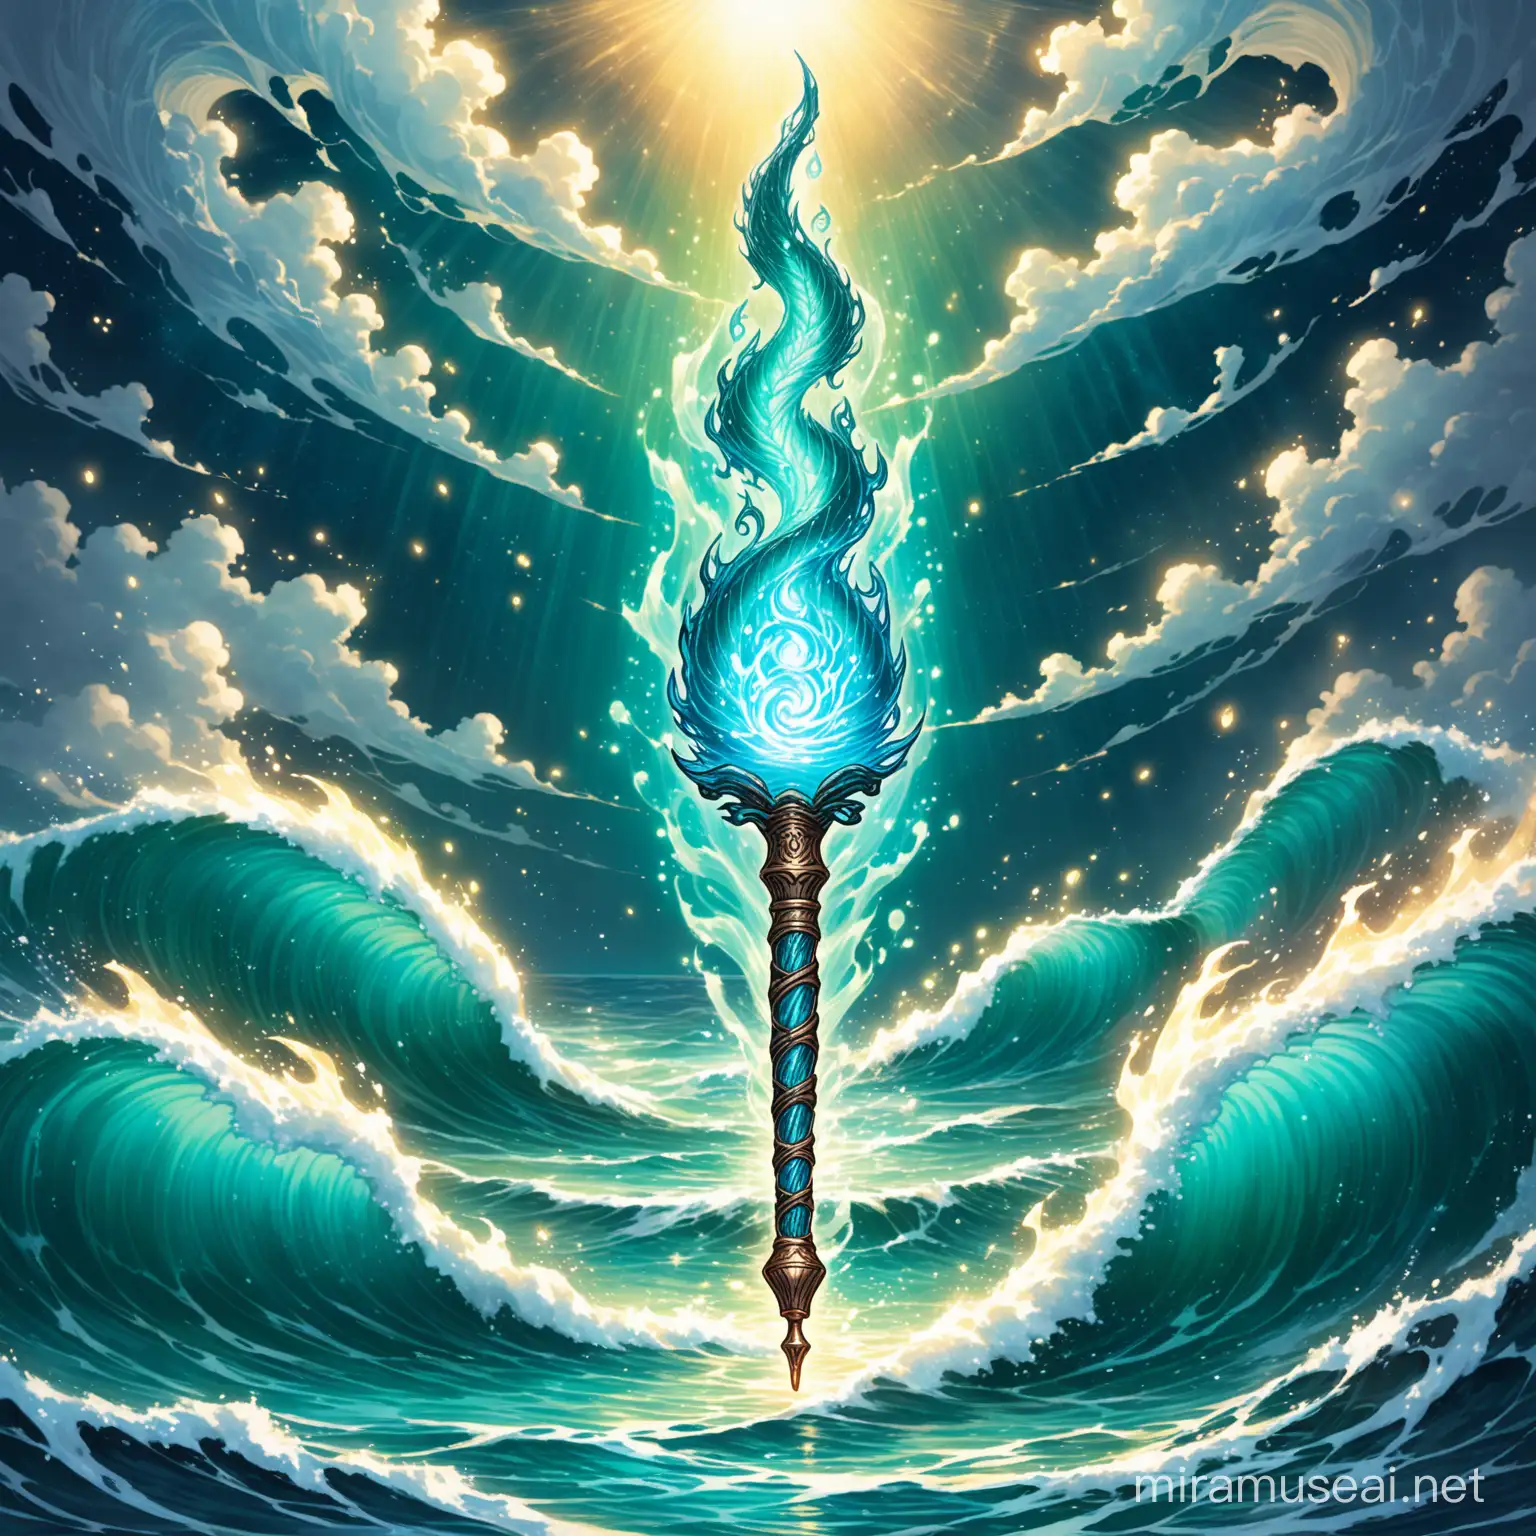 The 12.8-inch magic wand is crafted from rare sea-blue oak, a mystical wood known for its connection to the depths of the ocean and its calming energy. The wand is elegantly carved with intricate patterns resembling waves and sea creatures, enhancing its magical aura.

Infused with the potent essence of dragon's breath, the wand emits a faint, ethereal glow that shimmers like flames dancing on water. This enchanting energy imbues the wand with a fiery power that can be harnessed by skilled magicians to cast powerful spells and channel elemental forces.

When held in the hand of a skilled magician, the sea-blue oak wand resonates with ancient magic, allowing its wielder to tap into the raw power of the elements and weave spells of great potency. Its connection to the sea and the dragons infuses it with a sense of mystery and power, making it a prized possession for any sorcerer or wizard seeking to unlock the secrets of the arcane.

